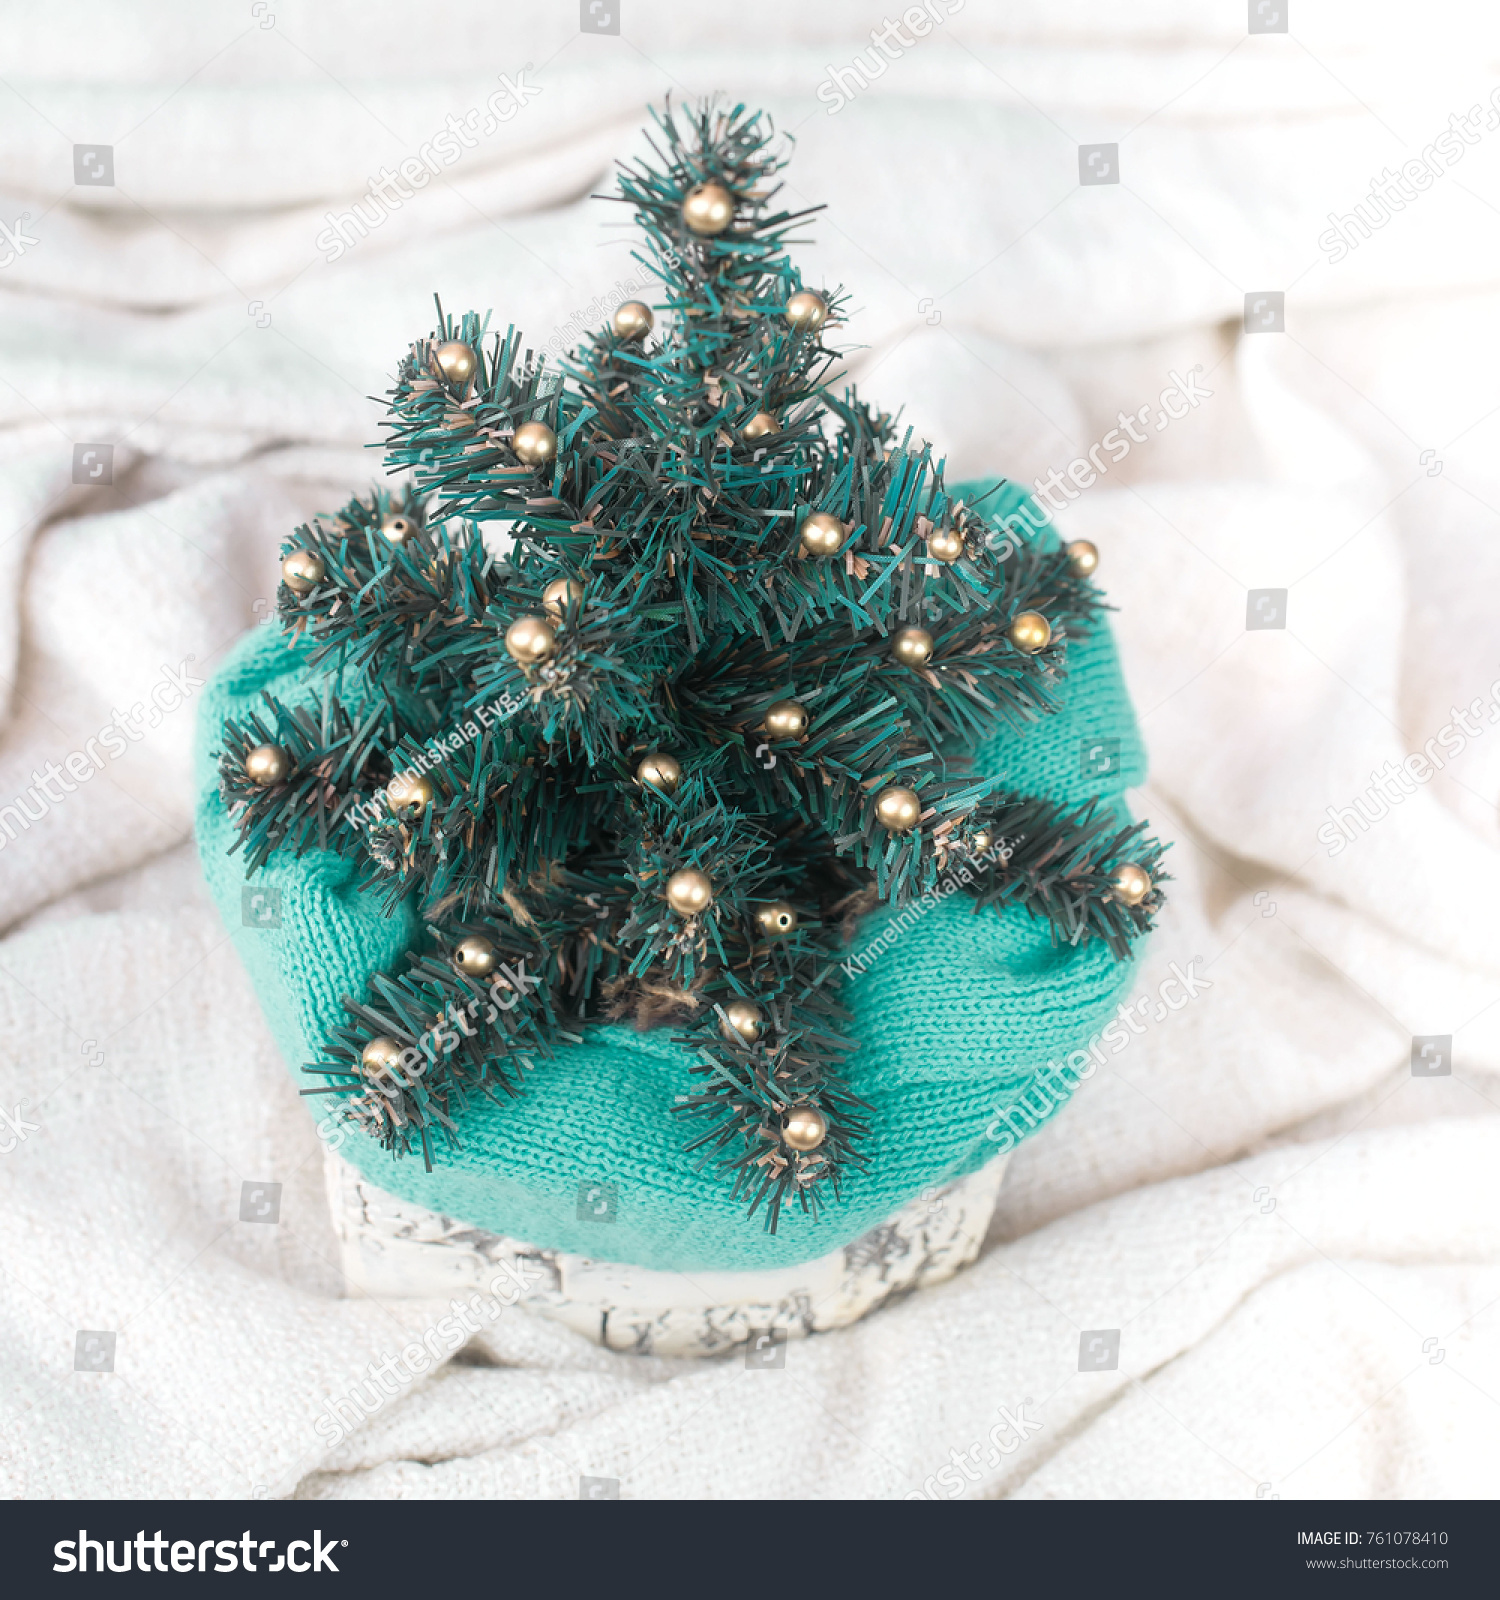 Decorative Christmas tree in a pot. The view from the top. Square. #761078410